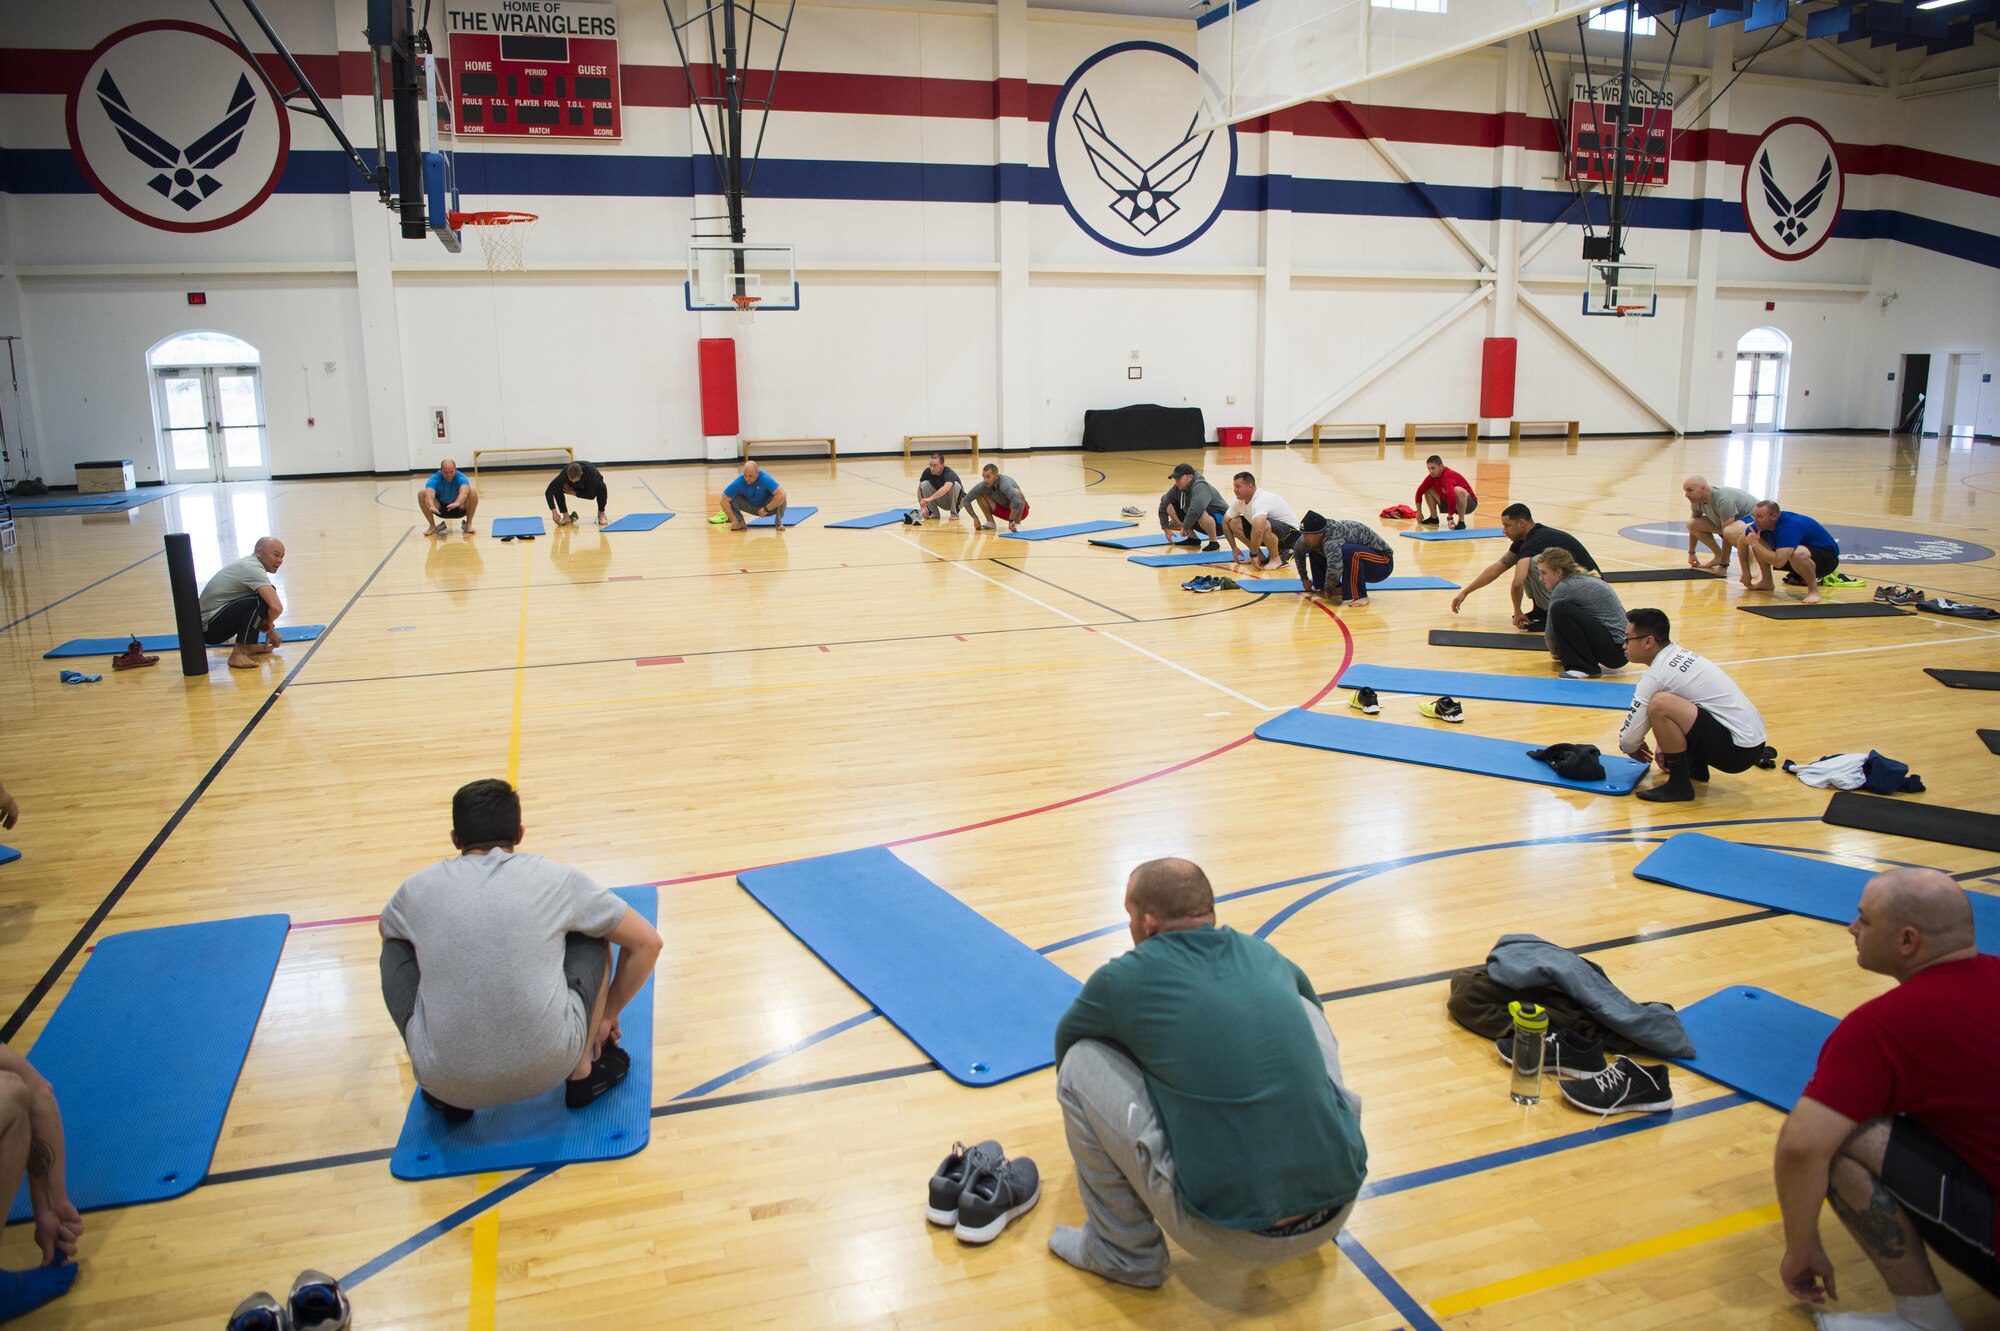 Base personnel perform a squat stretch during a natural running form clinic at F.E. Warren Air Force Base, Wyo., Oct. 6, 2016. More than 50 people signed up for this one-day course, to improve their running. “I brought this course here to help Airmen improve their run times and decrease risk of injury during their physical training test.” said Alison Morrell, 90th Medical Operations Squadron health promotion coordinator. “I think it’s important to understand a well-rounded fitness program for overall health and longevity.” (U.S. Air Force photo by Staff Sgt. Christopher Ruano)